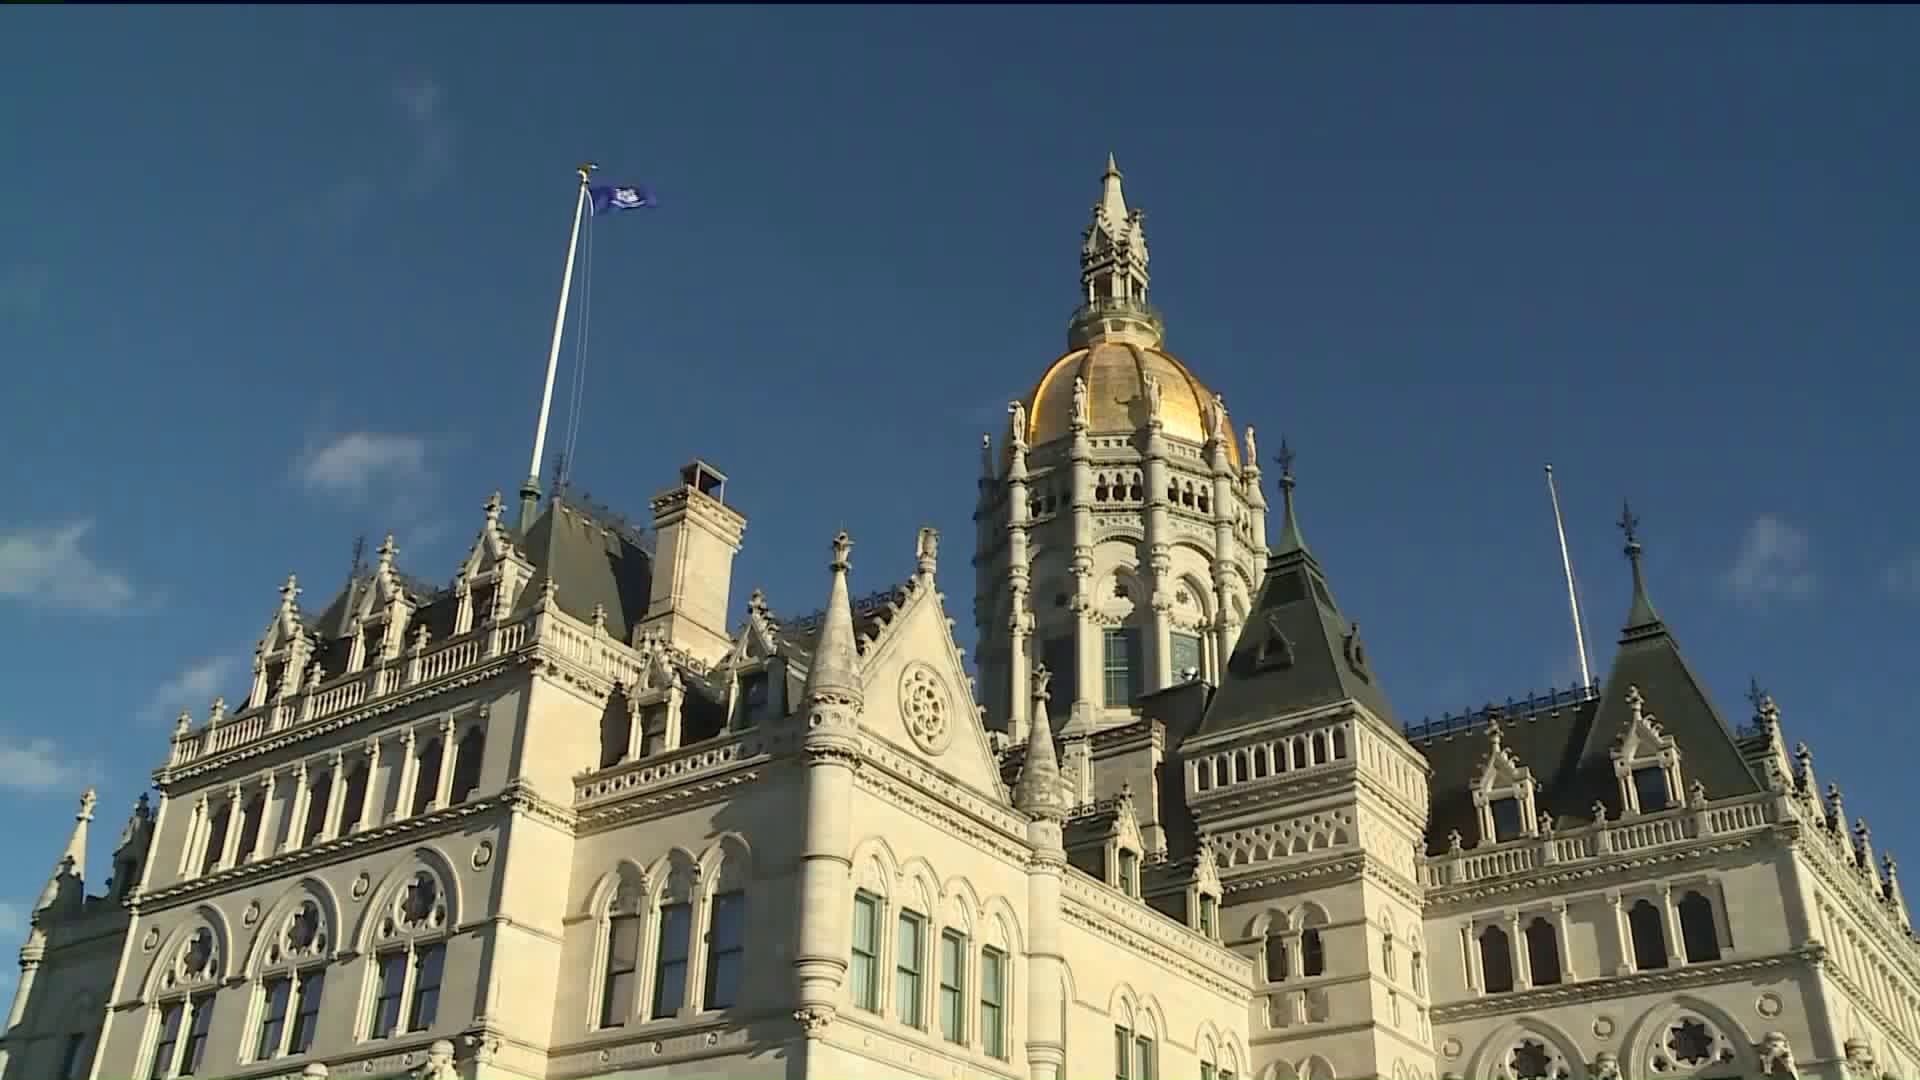 First day of 2019 brought new laws to Connecticut